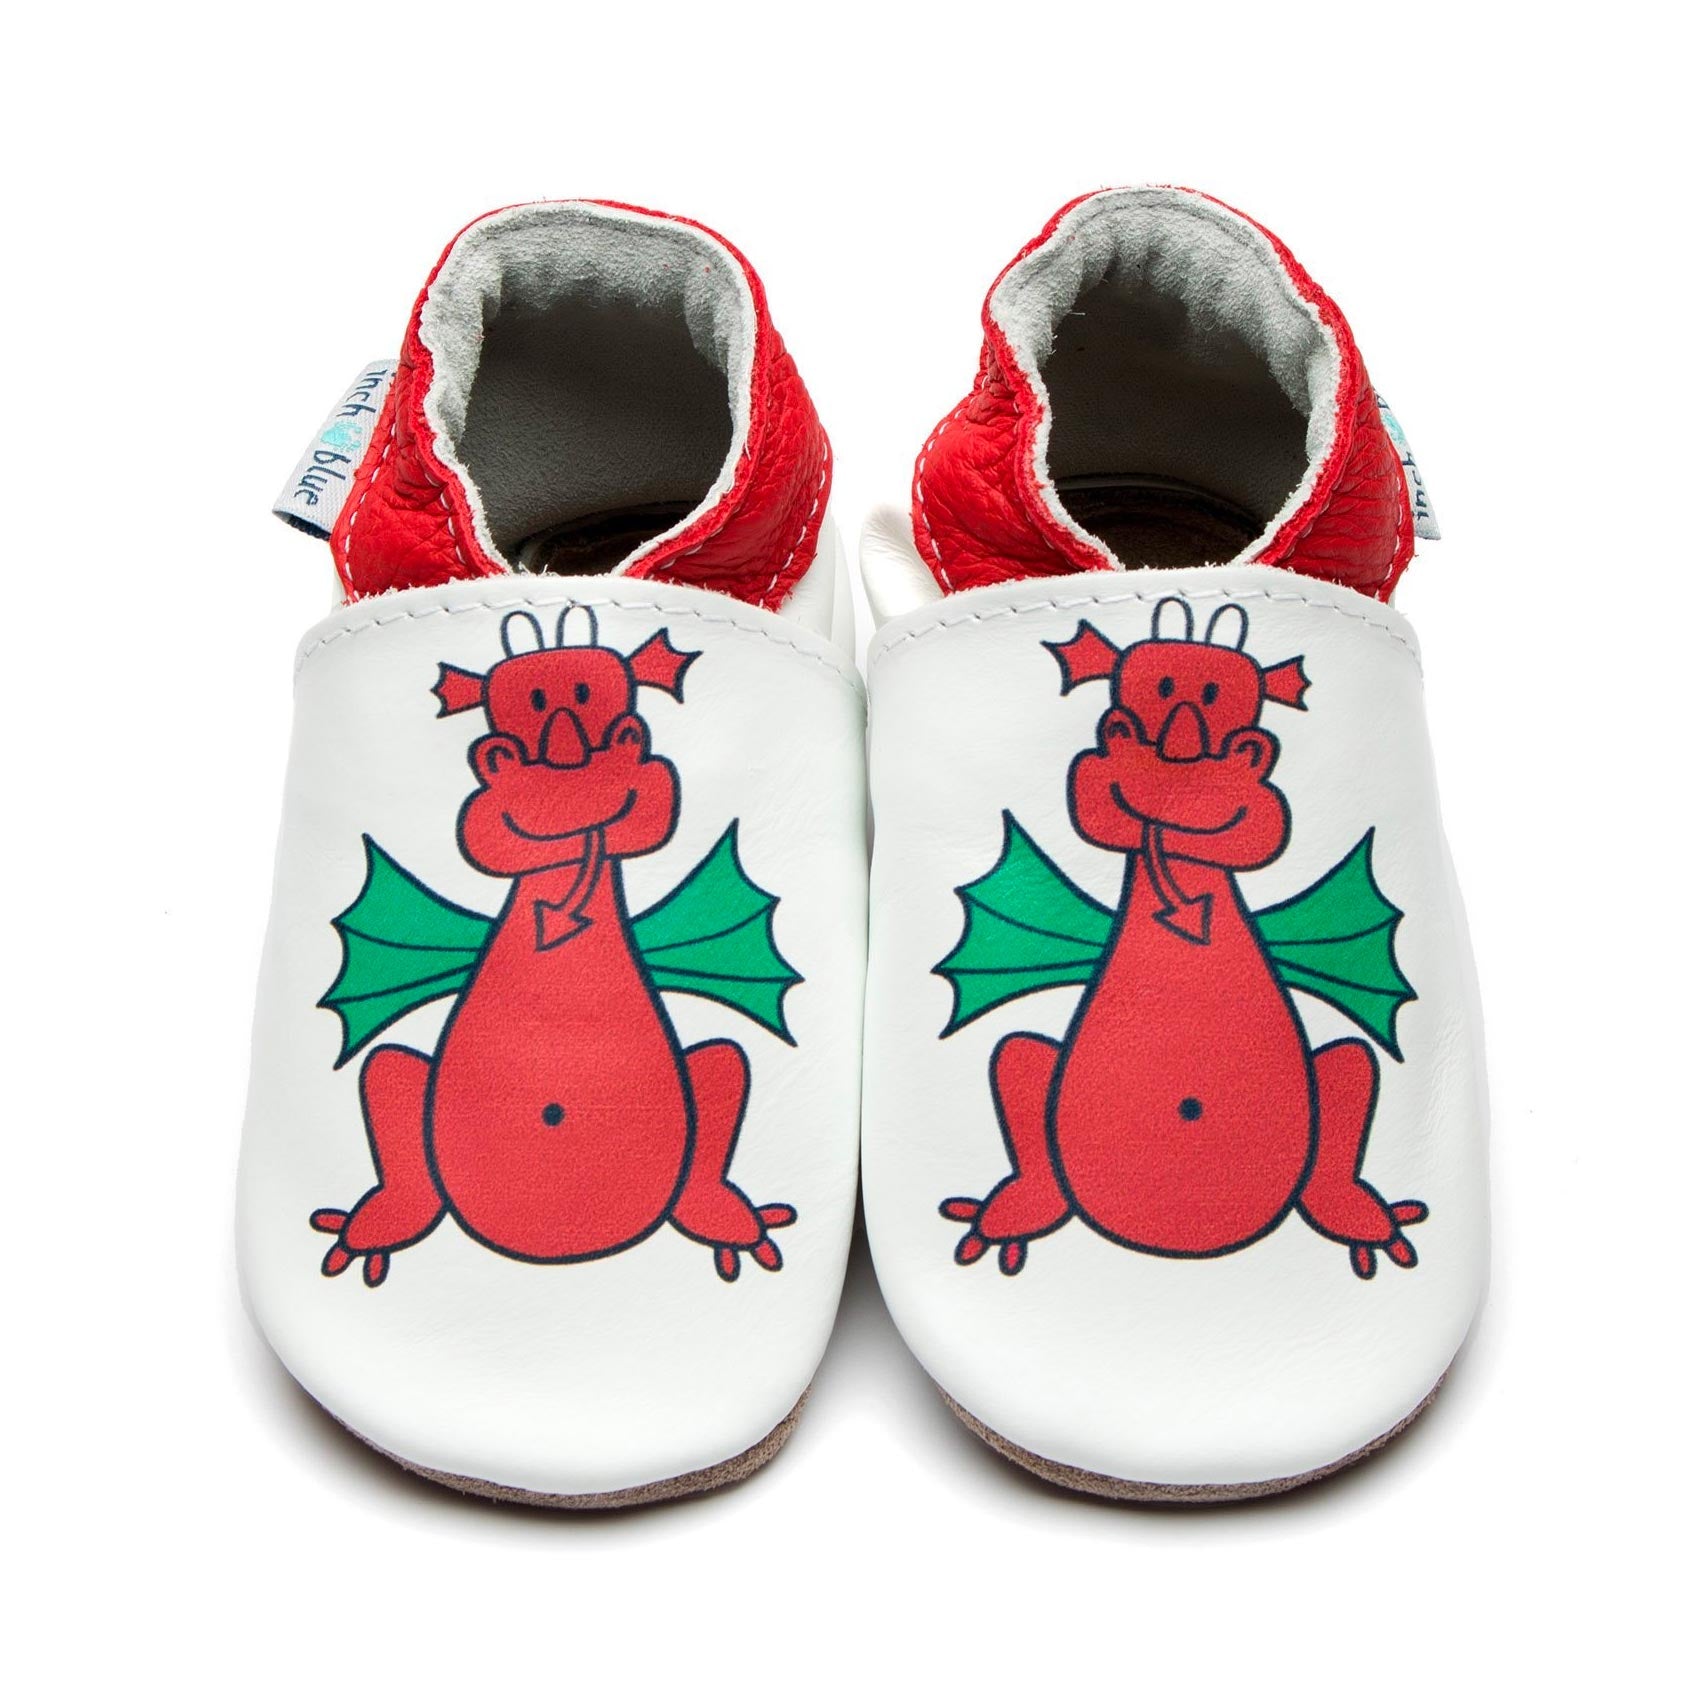 Baby / Childrens Shoes - Leather - Welsh Dragon